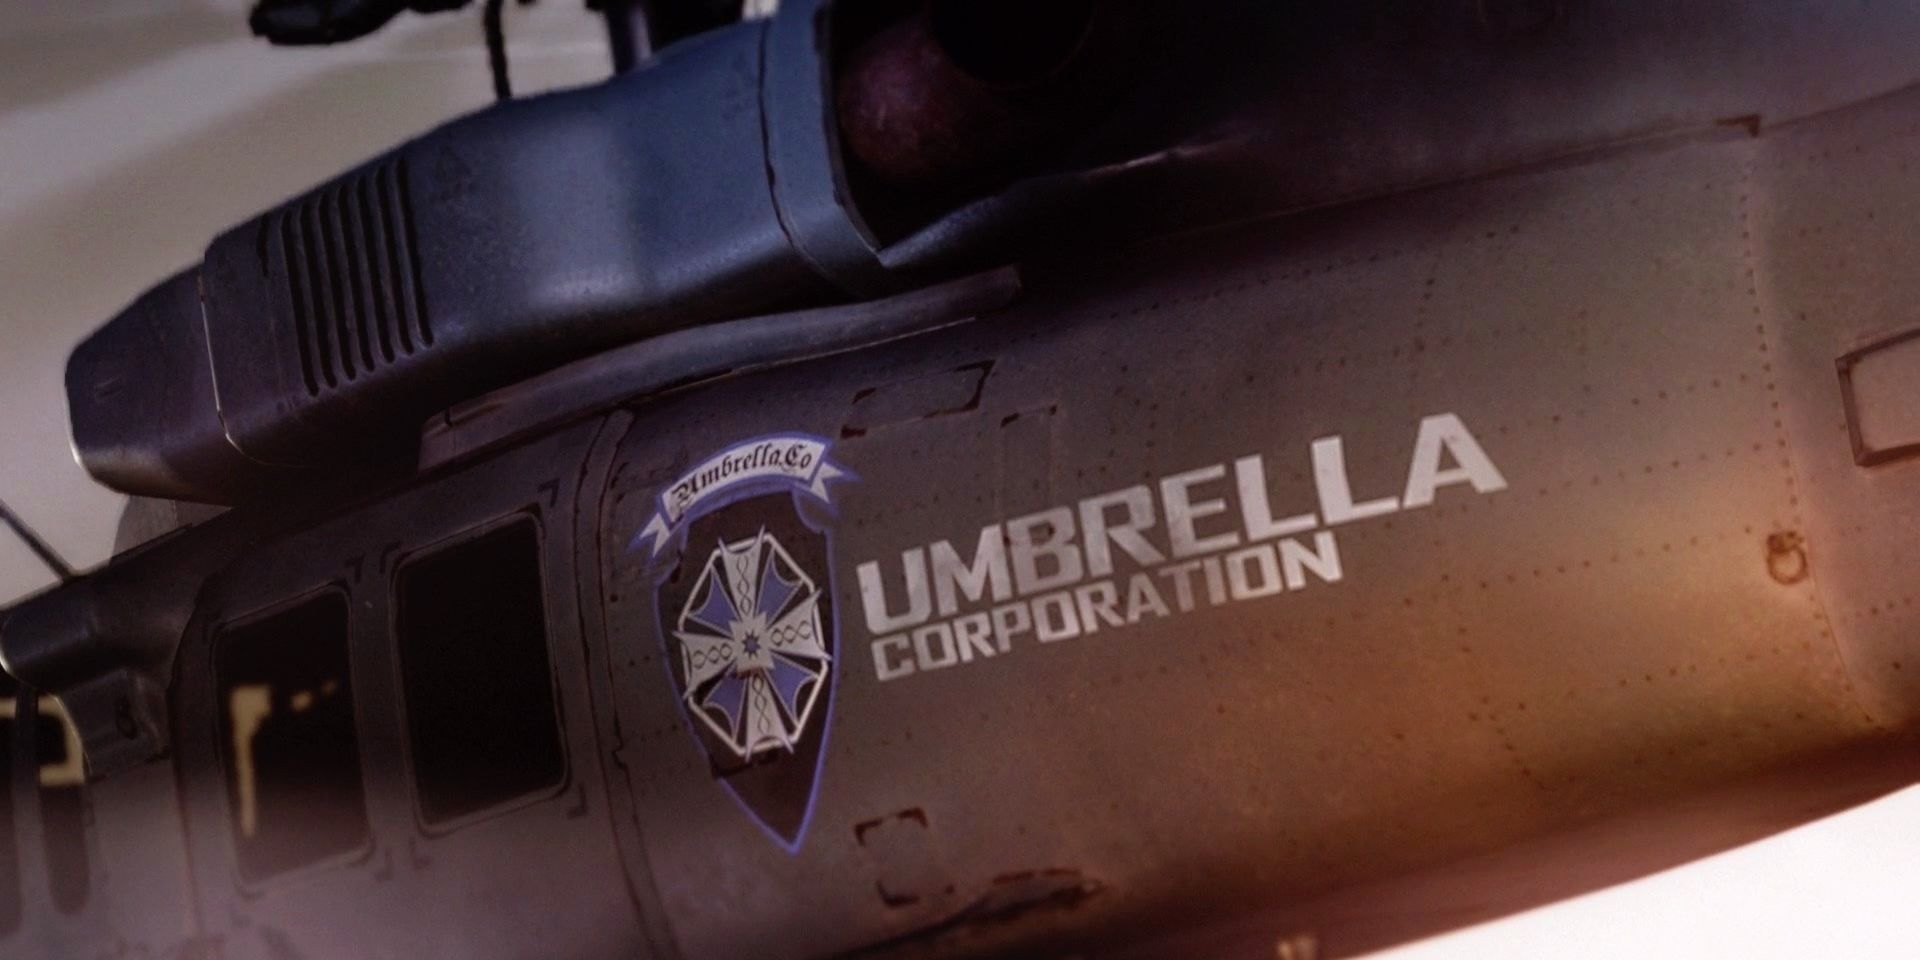 Resident Evil: 8 Things That Make No Sense About The Umbrella Corporation